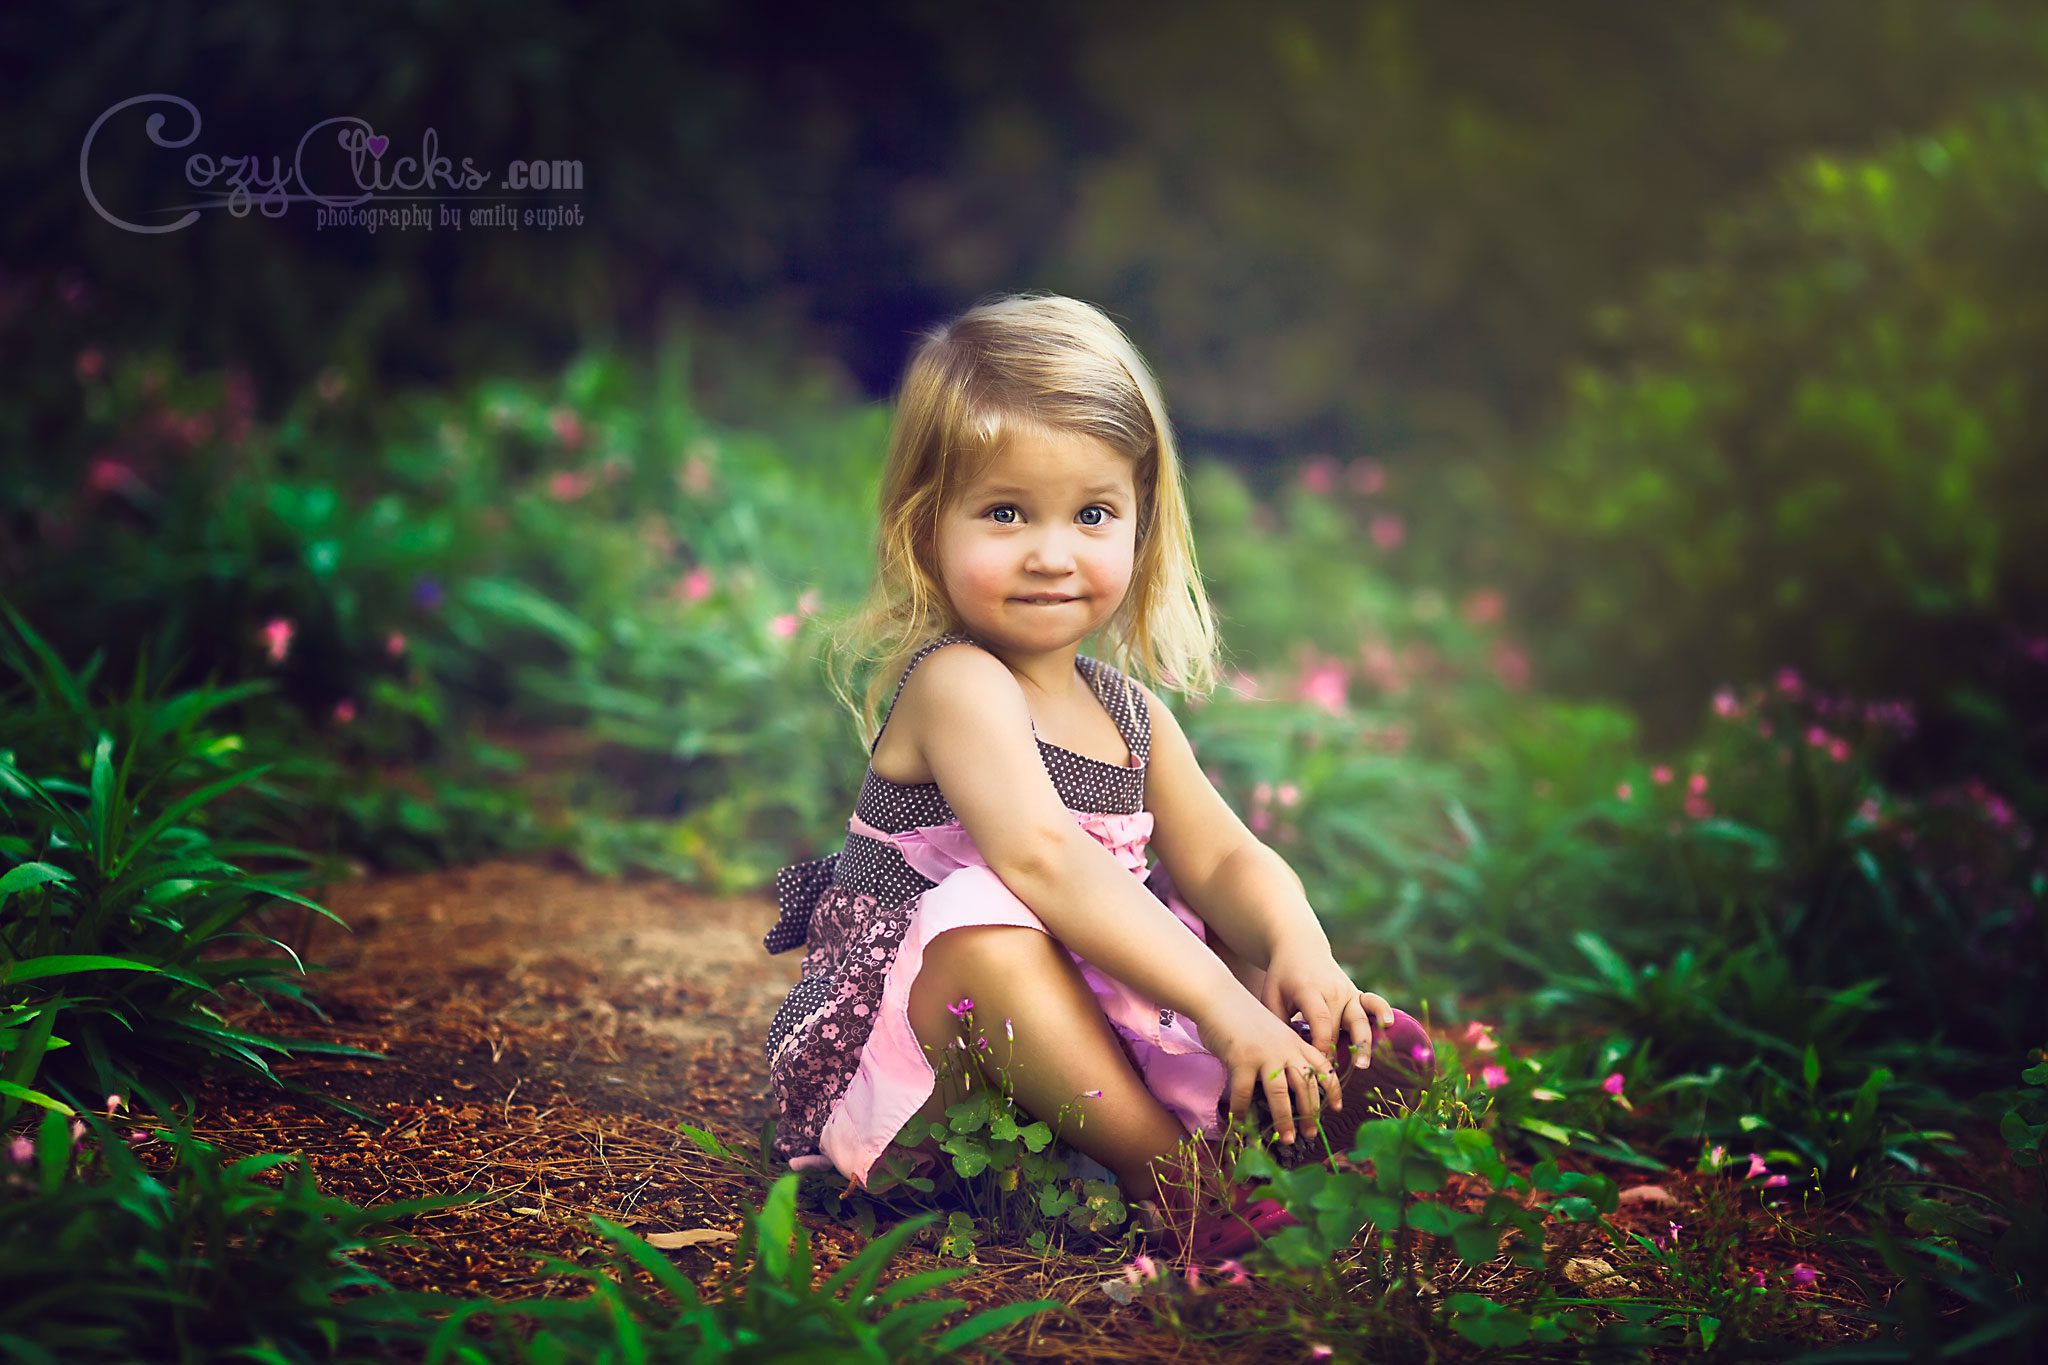 Phoenix and Ahwatukee Family and Child Photographer